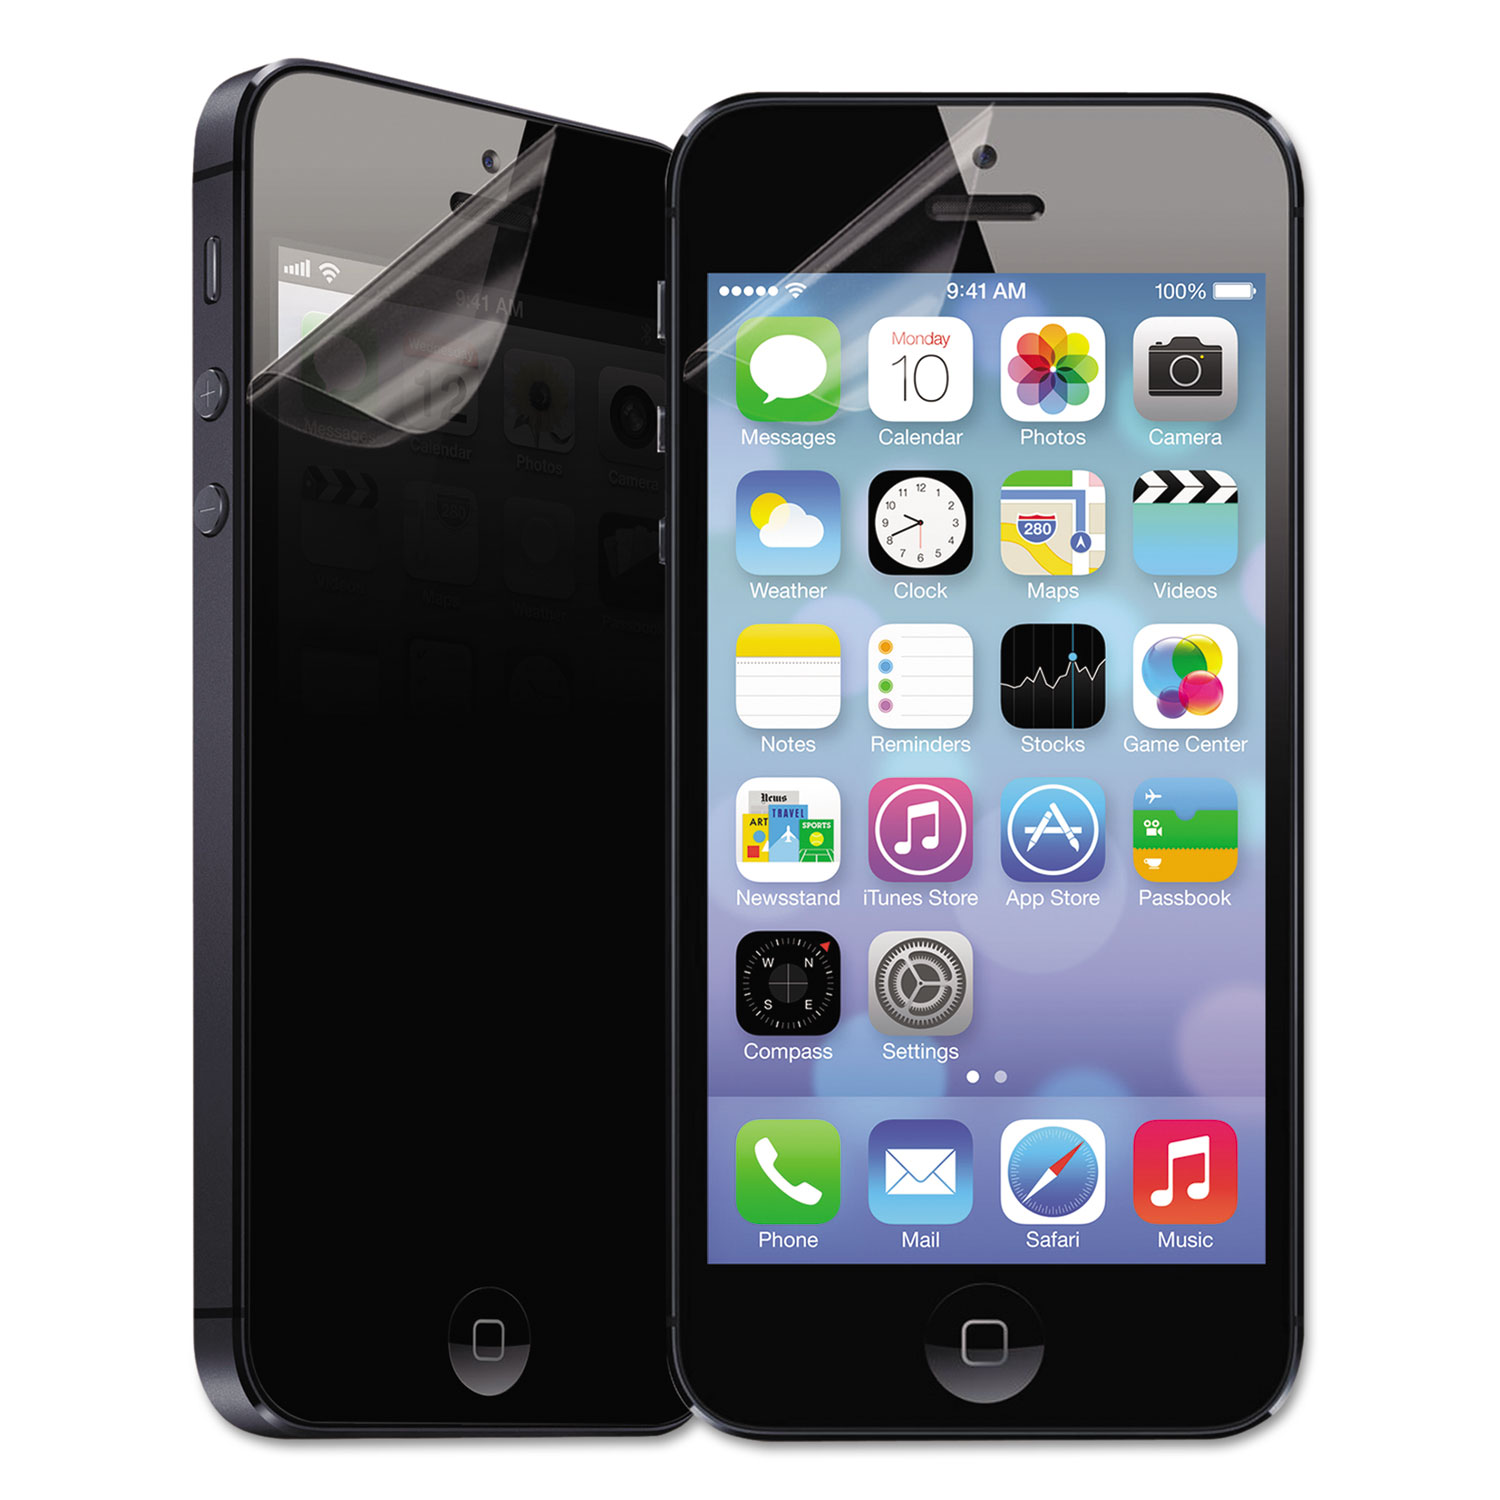 PrivaScreen Privacy Filter for iPhone 5/5c/5s, Black